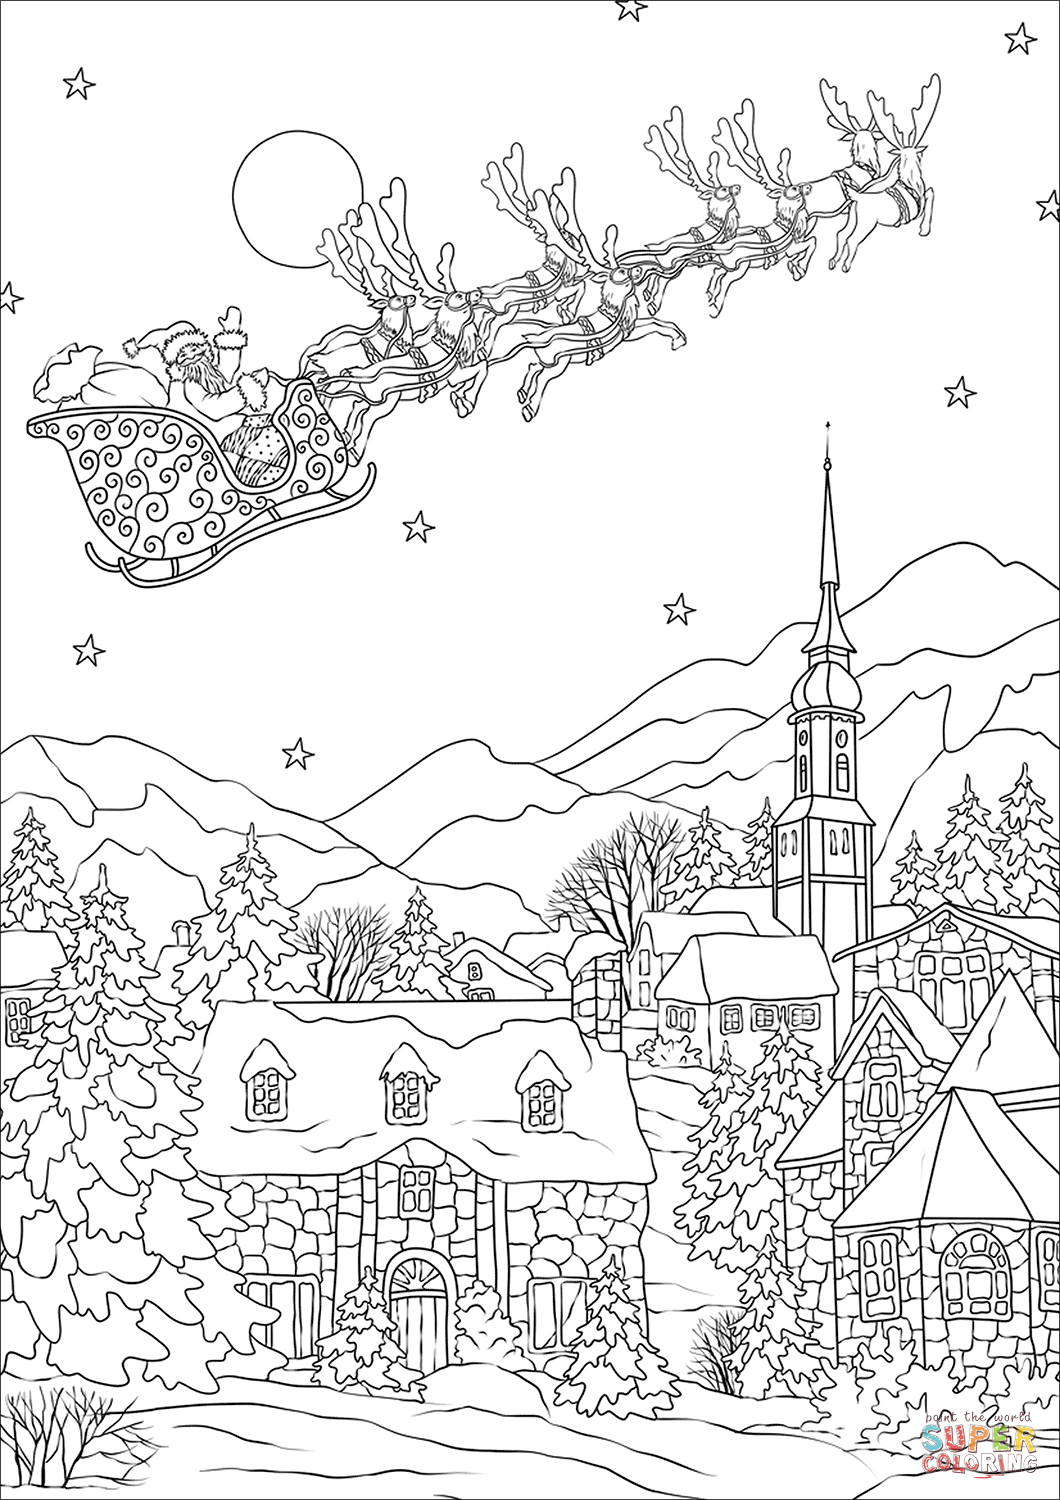 scenery coloring pages for adults | free printable coloring pages for adults advanced | flower coloring pages for adults